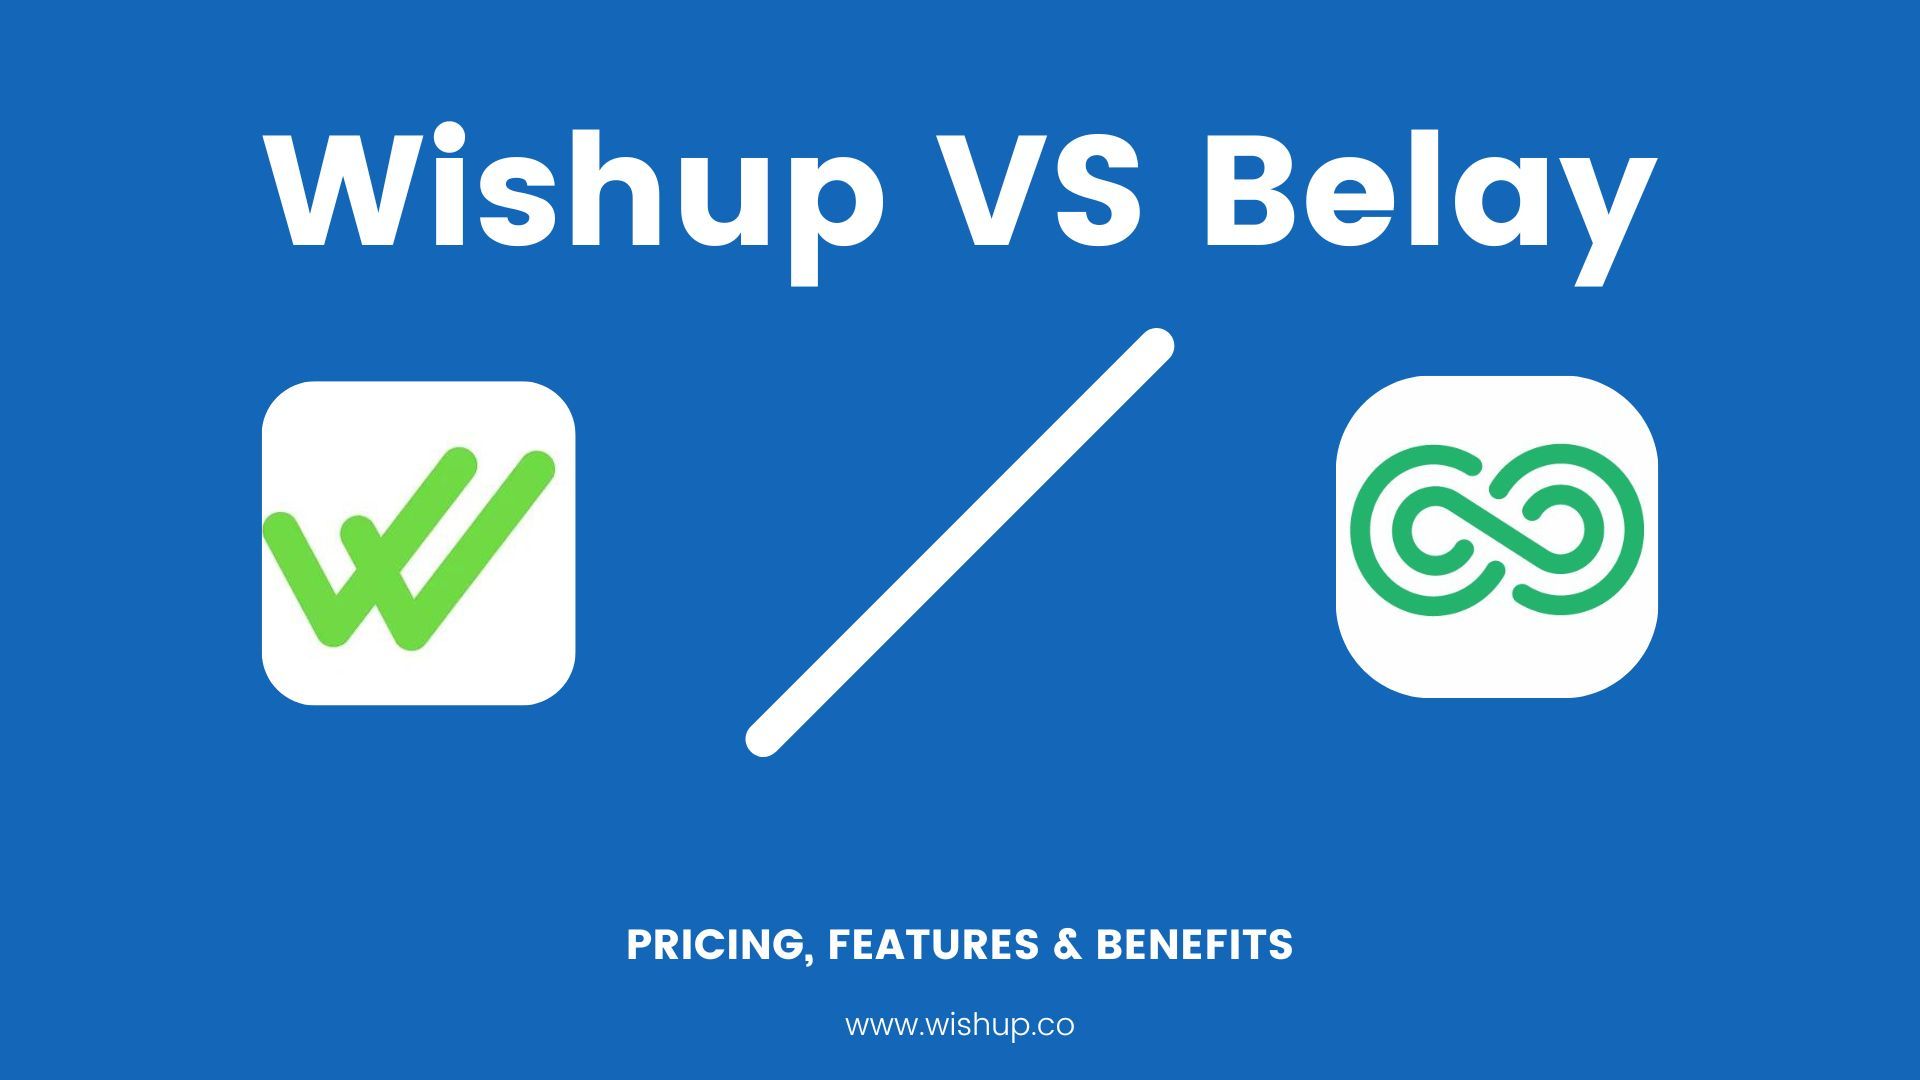 Wishup is a better Virtual Assistant Service than Belay